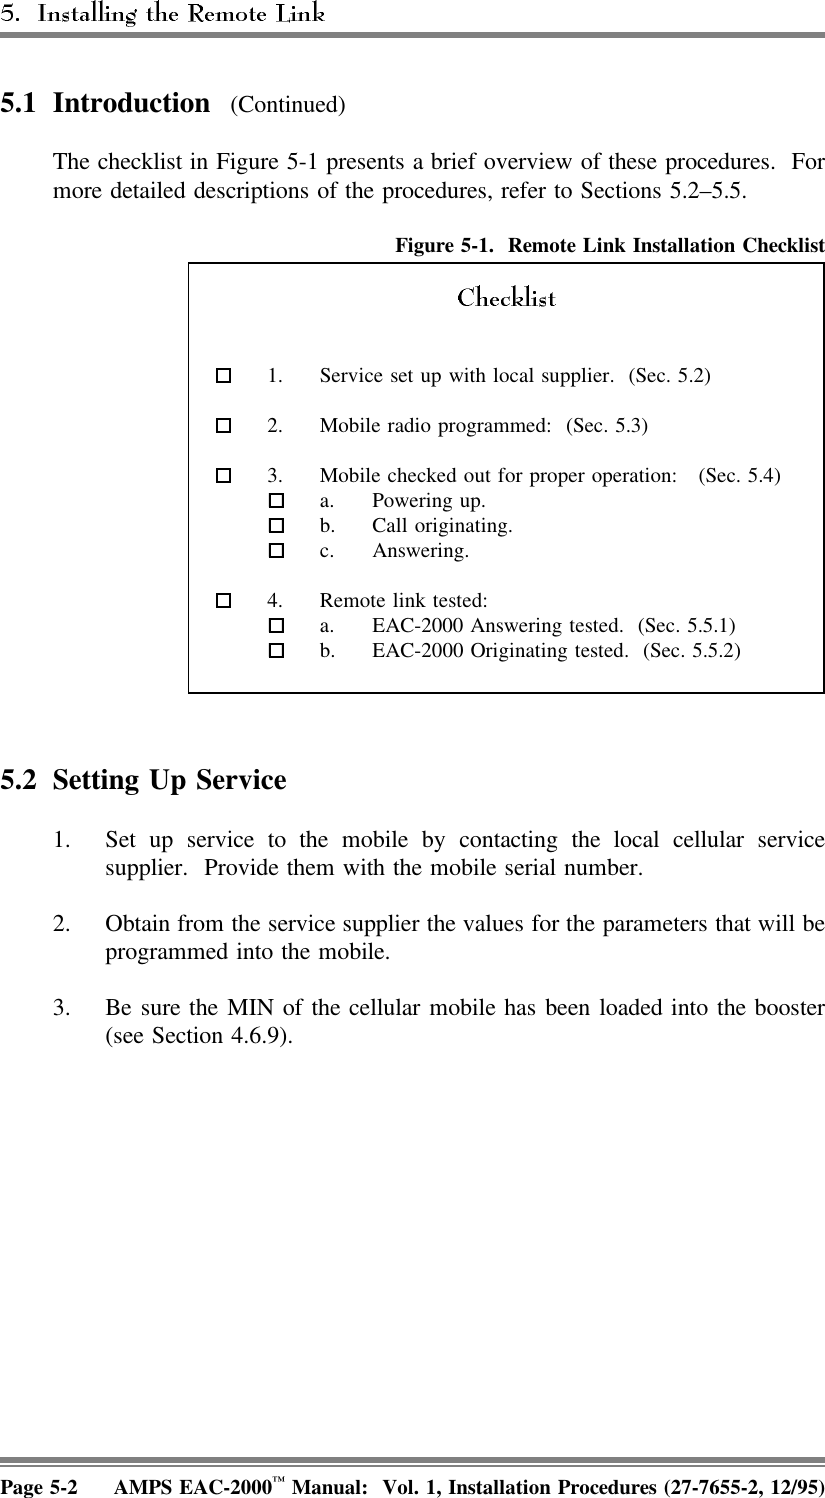 5.1 Introduction  (Continued)The checklist in Figure 5-1 presents a brief overview of these procedures.  Formore detailed descriptions of the procedures, refer to Sections 5.2–5.5.Figure 5-1.  Remote Link Installation Checklist  1. Service set up with local supplier.  (Sec. 5.2)  2. Mobile radio programmed:  (Sec. 5.3)  3. Mobile checked out for proper operation:  (Sec. 5.4) a. Powering up. b. Call originating. c. Answering. 4. Remote link tested:  a. EAC-2000 Answering tested.  (Sec. 5.5.1)  b. EAC-2000 Originating tested.  (Sec. 5.5.2)5.2 Setting Up Service 1. Set up service to the mobile by contacting the local cellular servicesupplier.  Provide them with the mobile serial number.2. Obtain from the service supplier the values for the parameters that will beprogrammed into the mobile.3. Be sure the MIN of the cellular mobile has been loaded into the booster(see Section 4.6.9).Page 5-2 AMPS EAC-2000™ Manual:  Vol. 1, Installation Procedures (27-7655-2, 12/95)